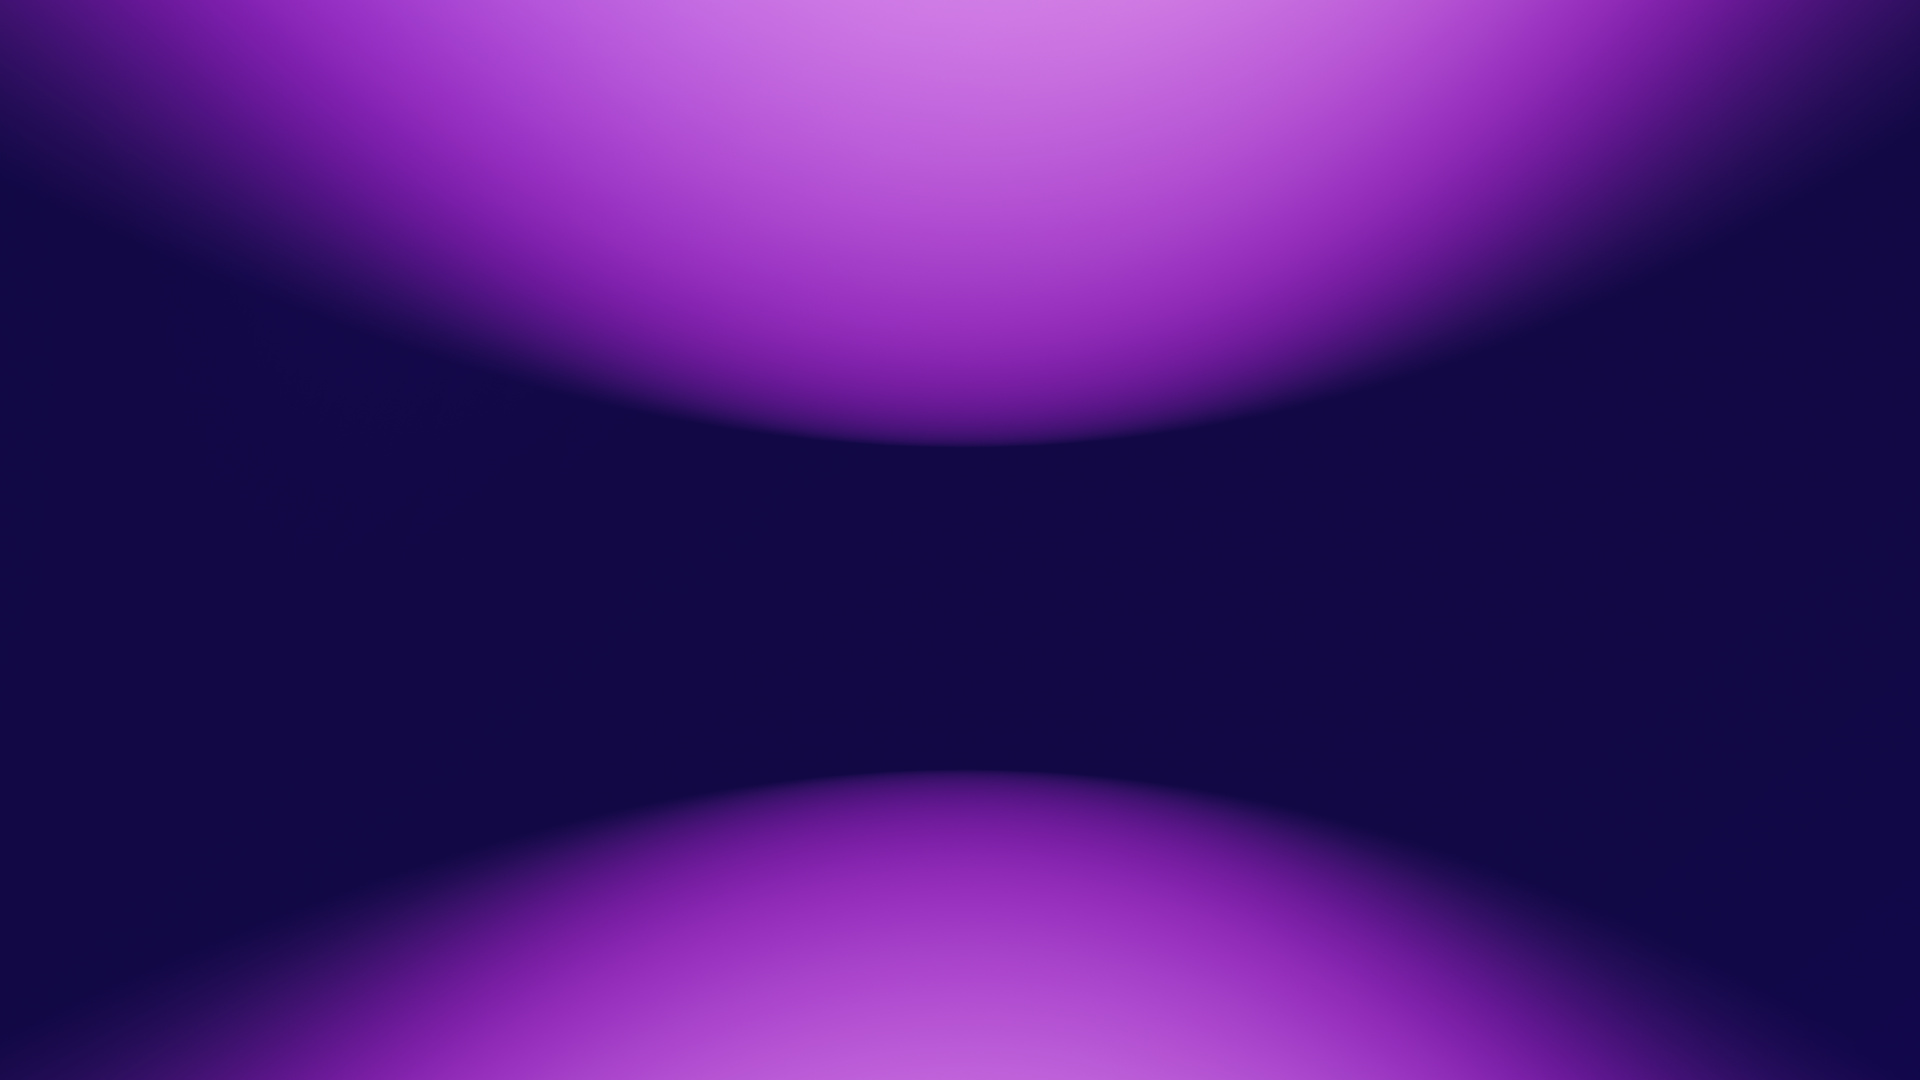 Circle, Apples, Ios, Colorfulness, Purple. Wallpaper in 1920x1080 Resolution